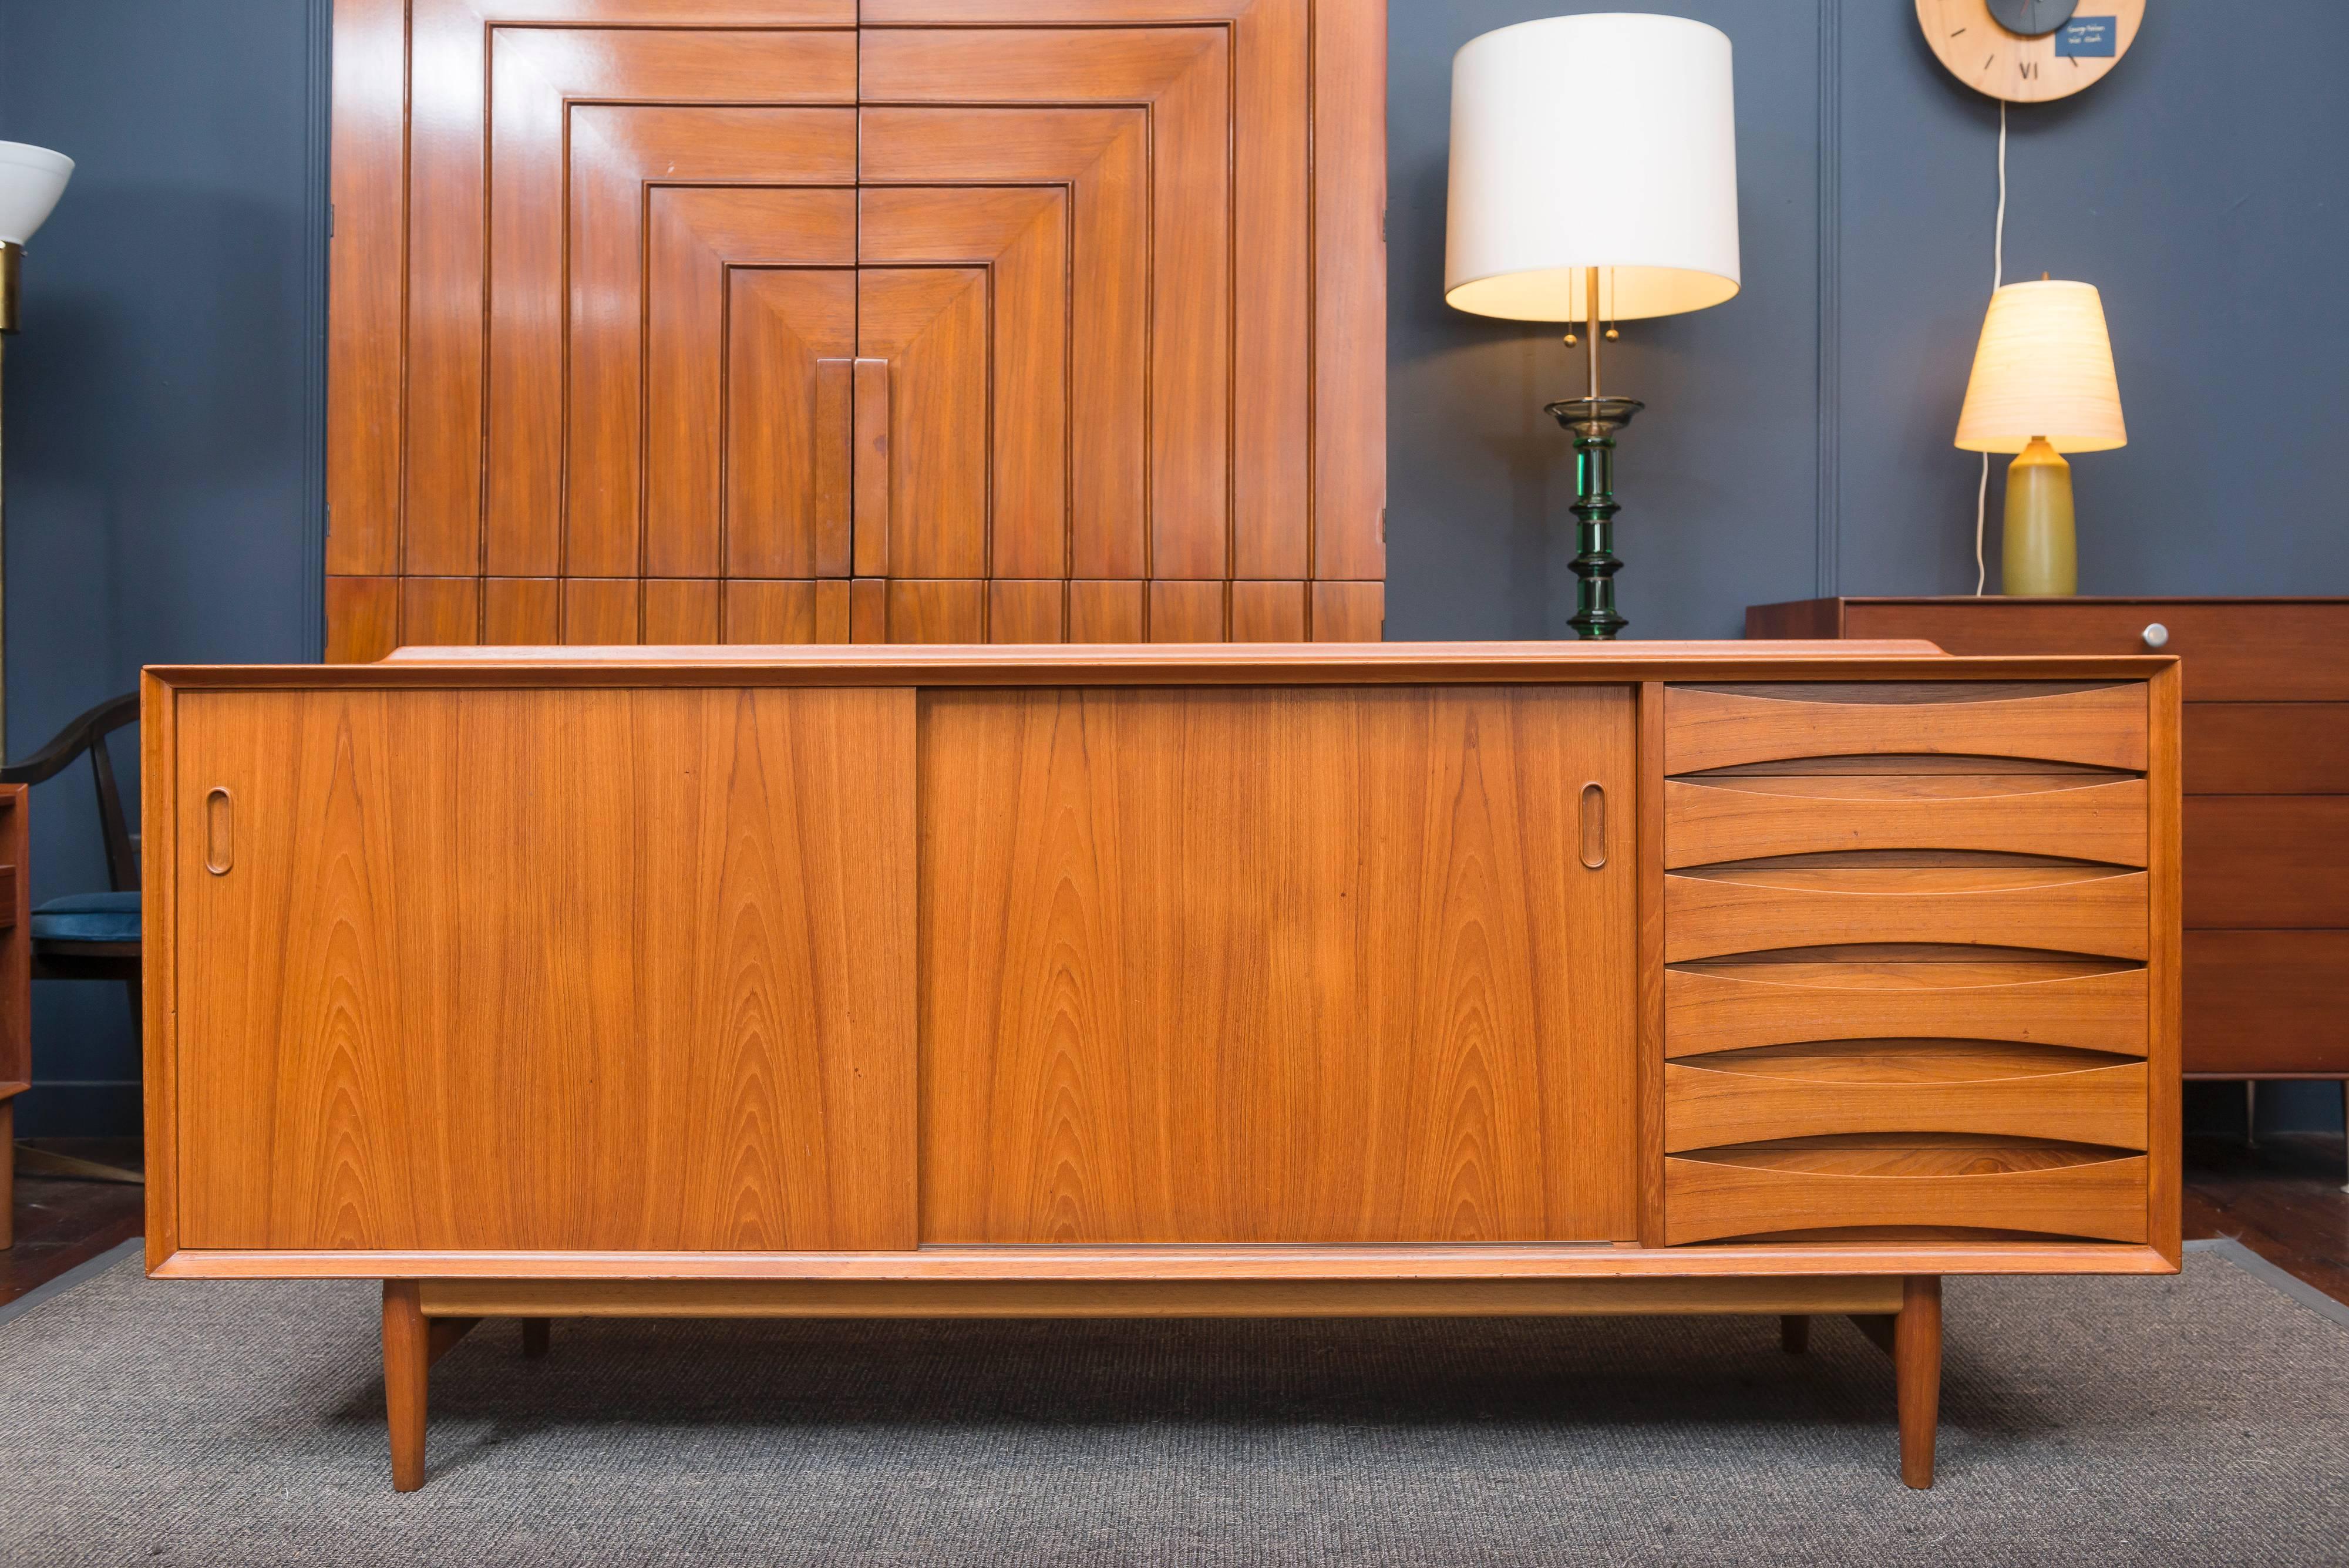 Timeless design and quality construction exhibited in this teak credenza by Arne Vodder for Sibast Furniture co. Perfectly refinished with adjustable shelves.